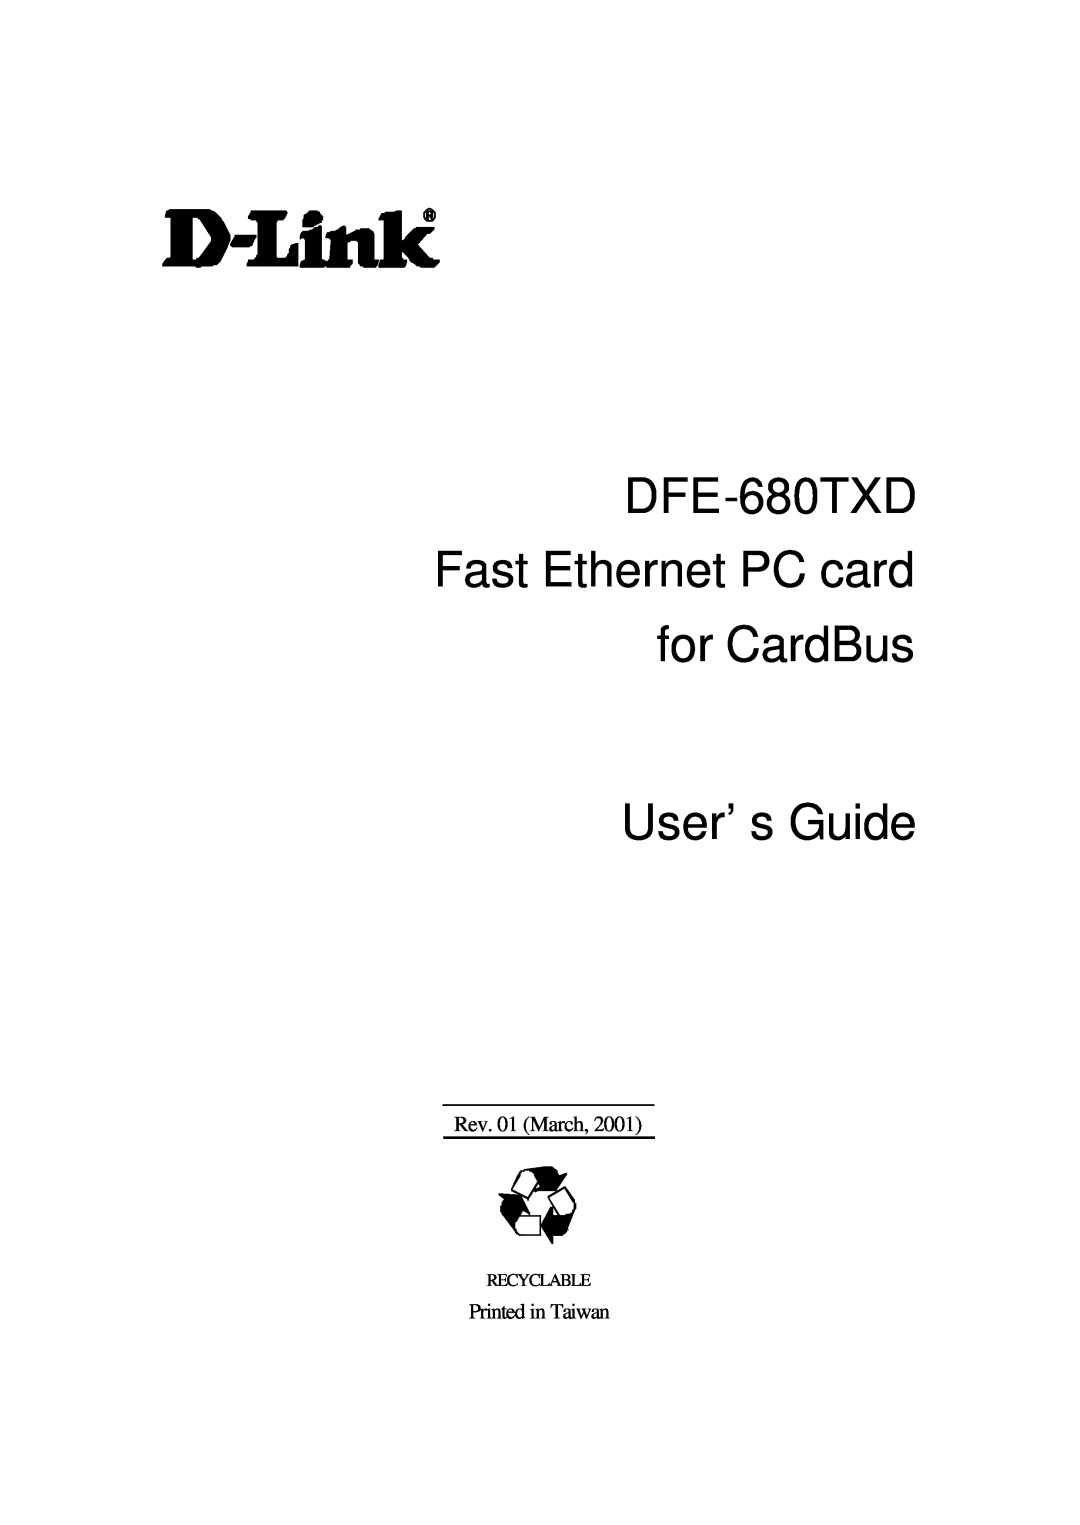 D-Link manual DFE-680TXD Fast Ethernet PC card for CardBus User’s Guide, Rev. 01 March, Printed in Taiwan 